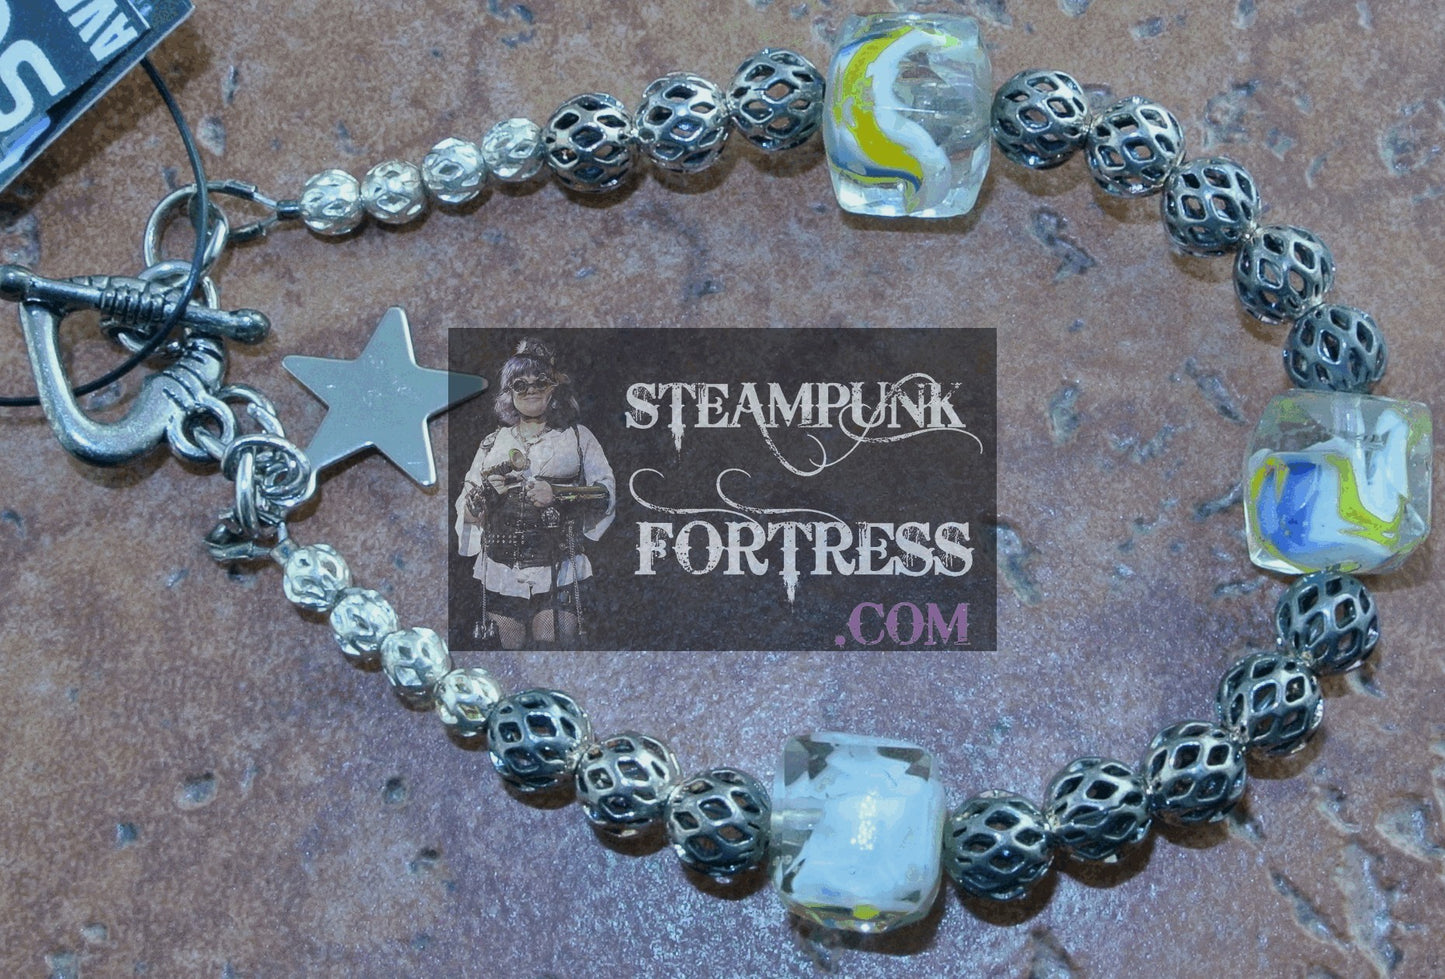 GLOW IN THE DARK YELLOW CLEAR BEADS SILVER FILIGREE BEADS BRACELET SET AVAILABLE STARR WILDE STEAMPUNK FORTRESS